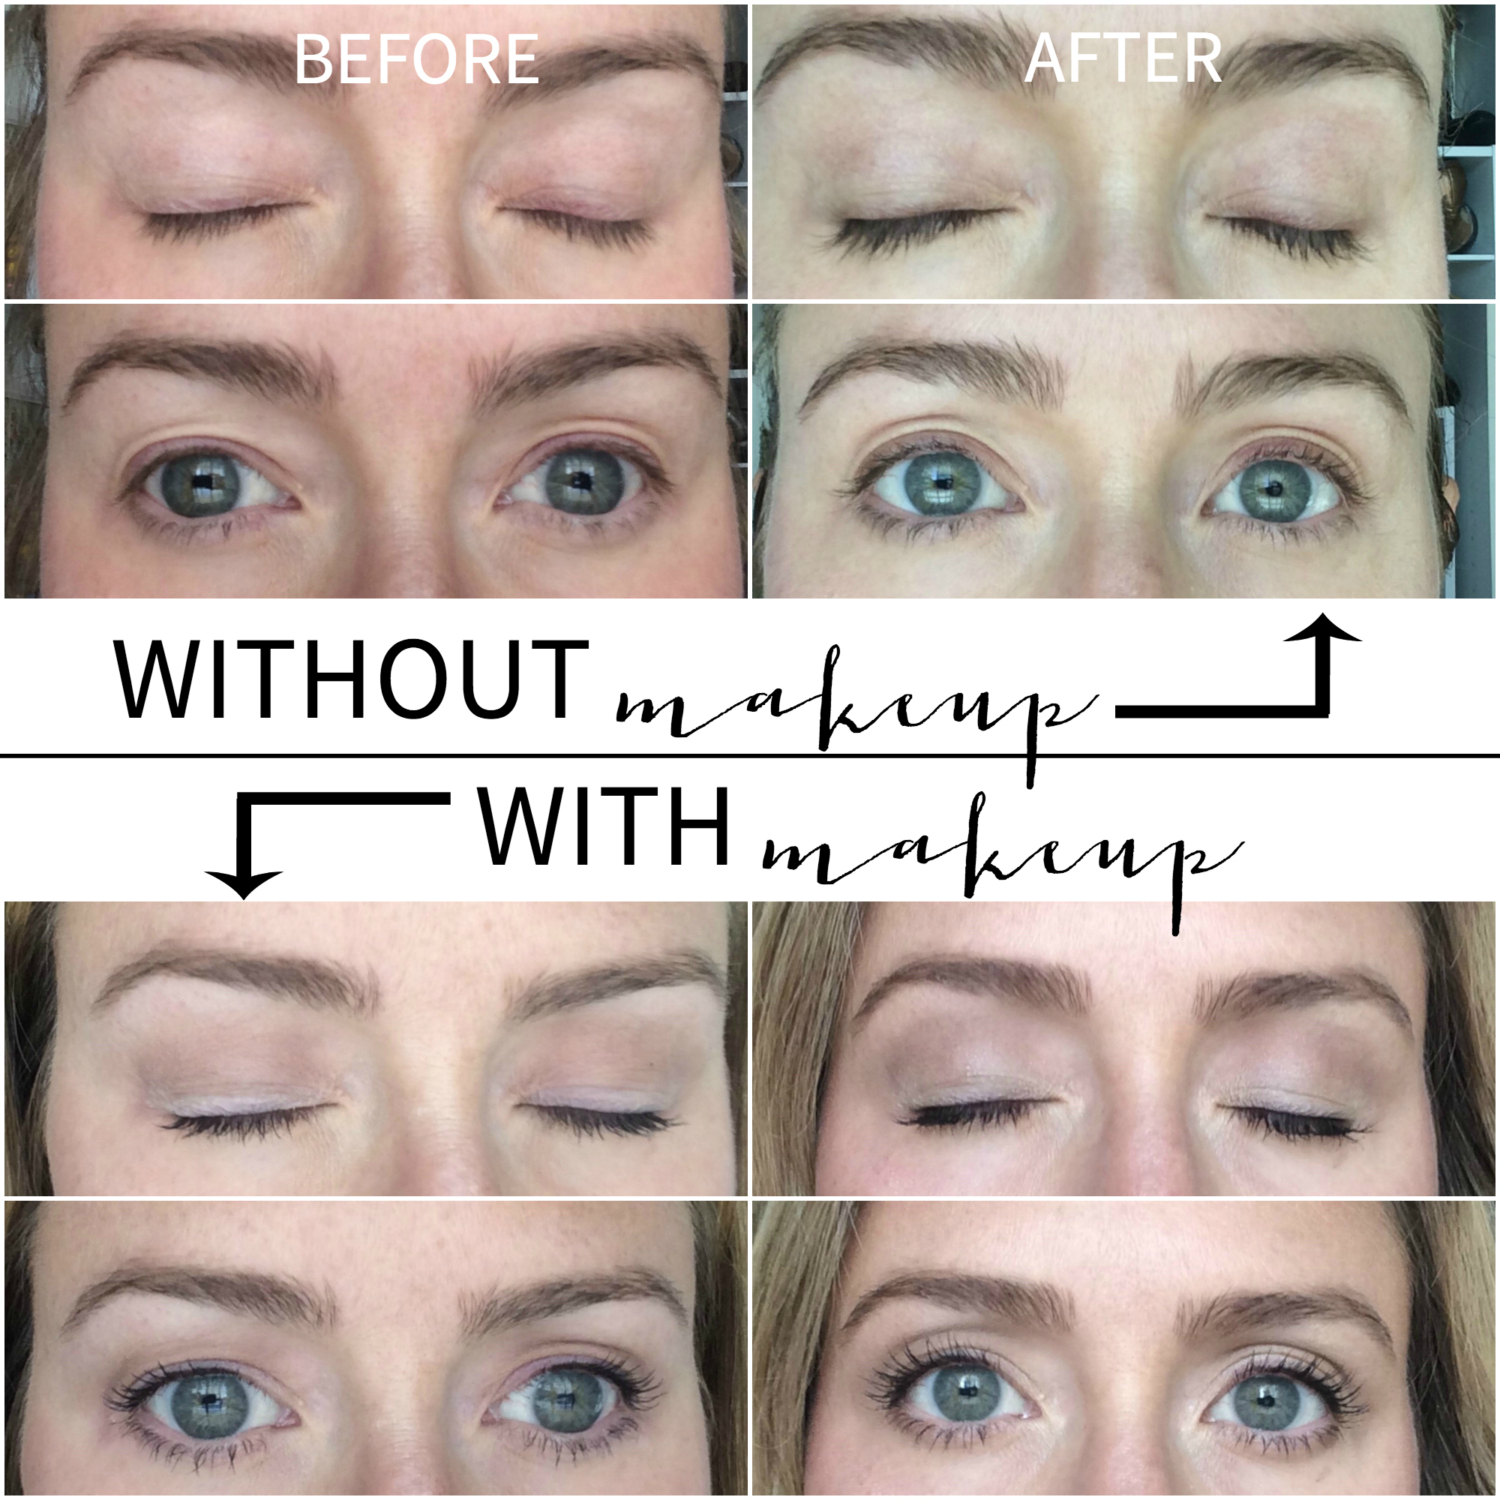 Rodan and Fields Lash Boost review - an honest review from a customer, NOT a Rodan and Fields consultant!